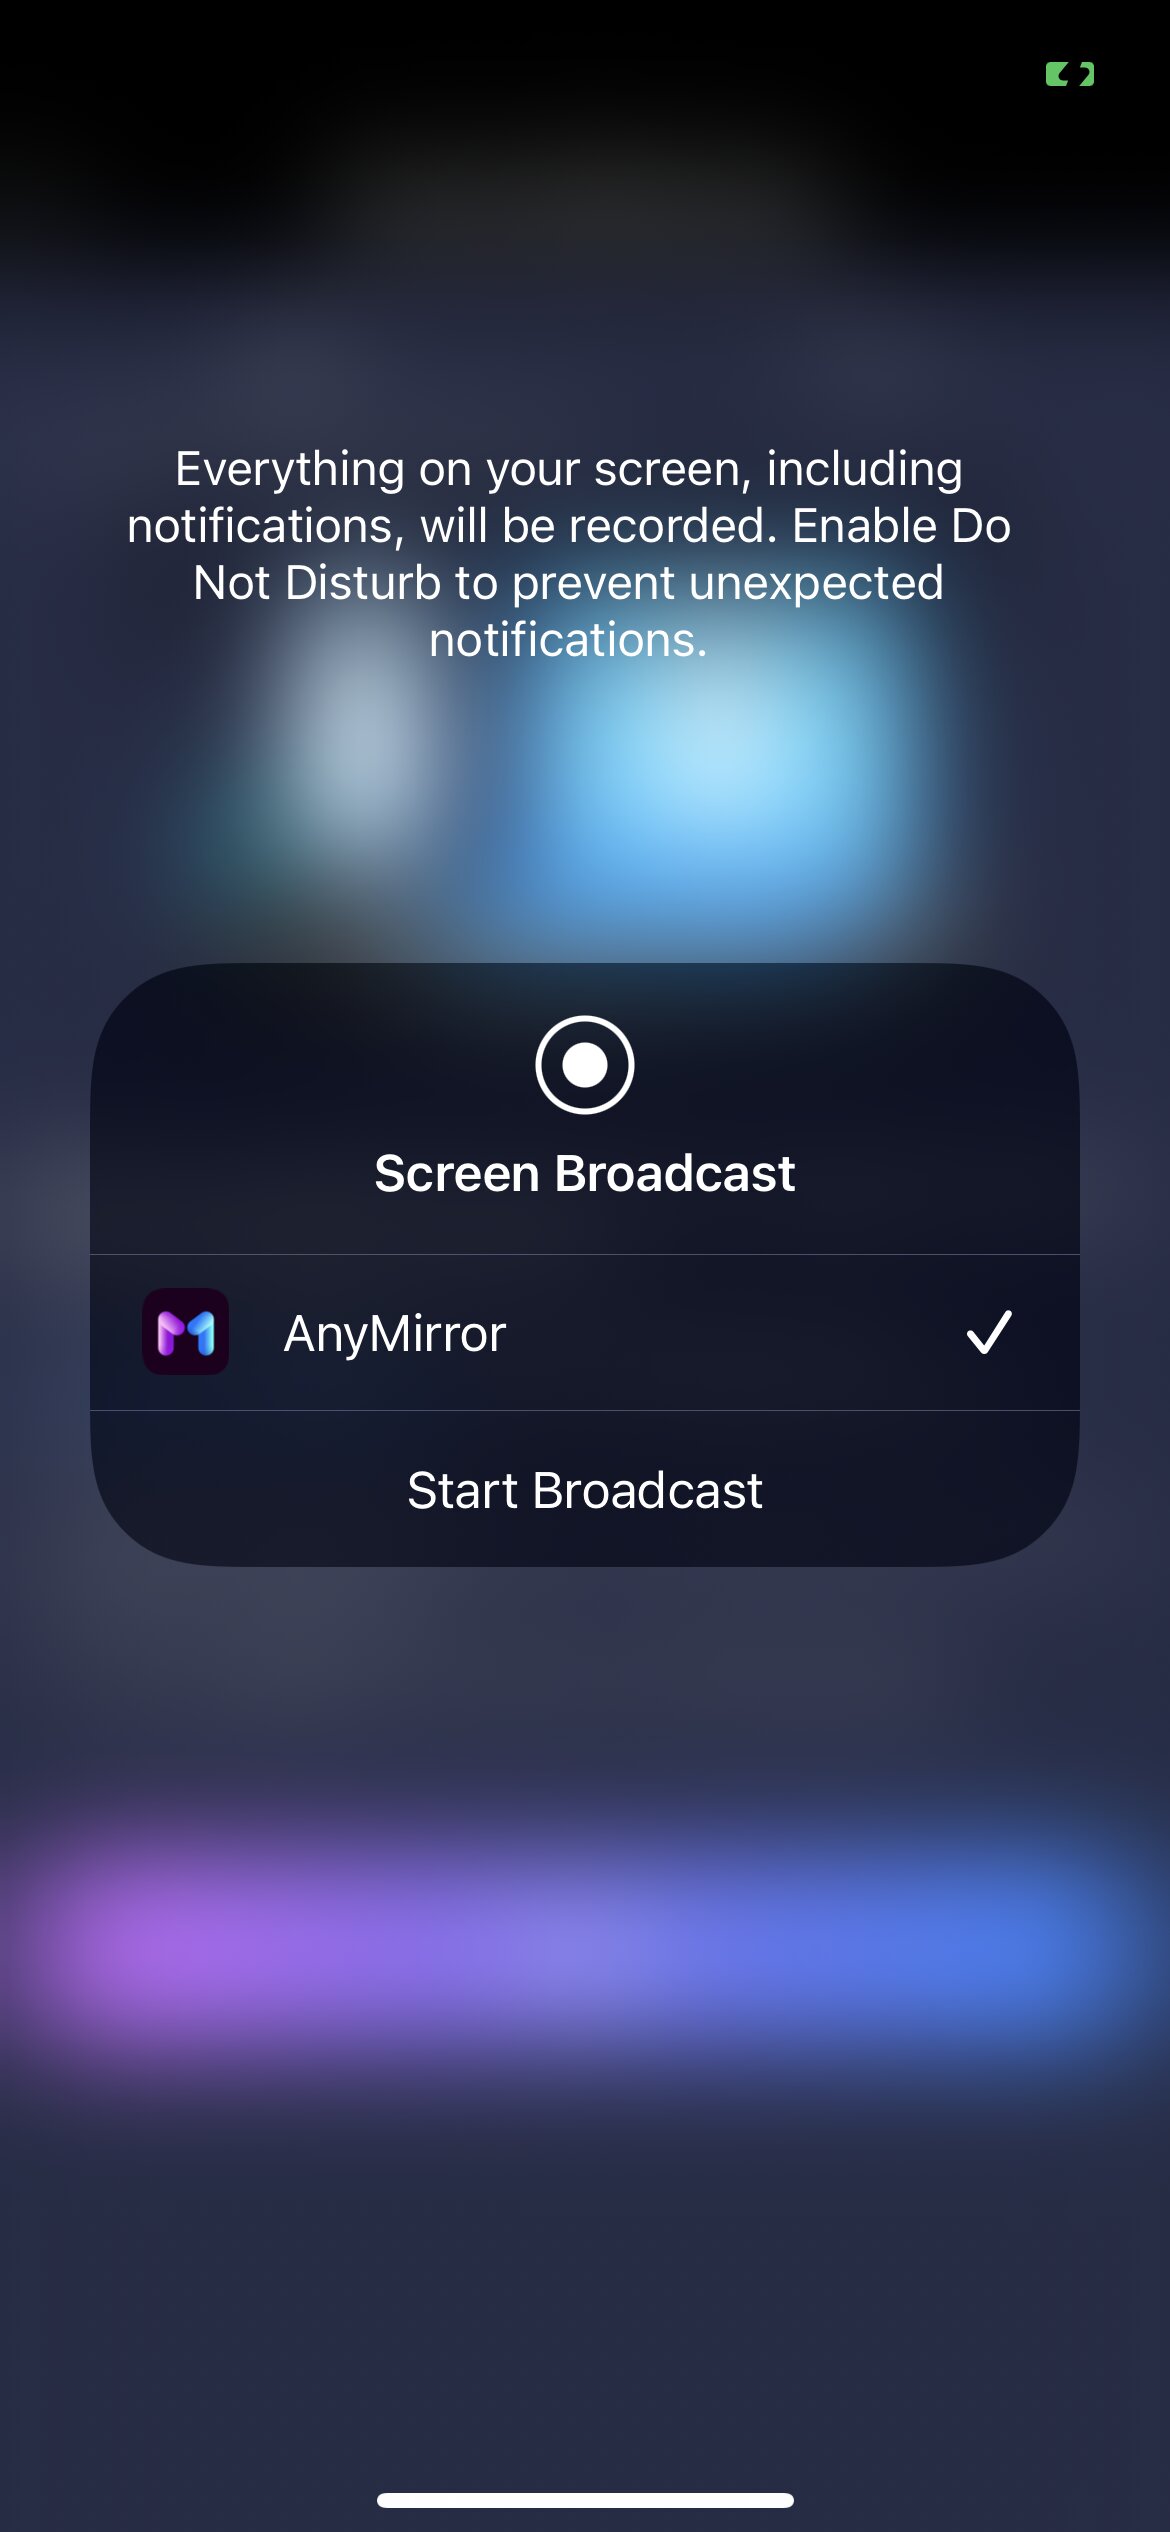 Click Start Broadcast on the Device